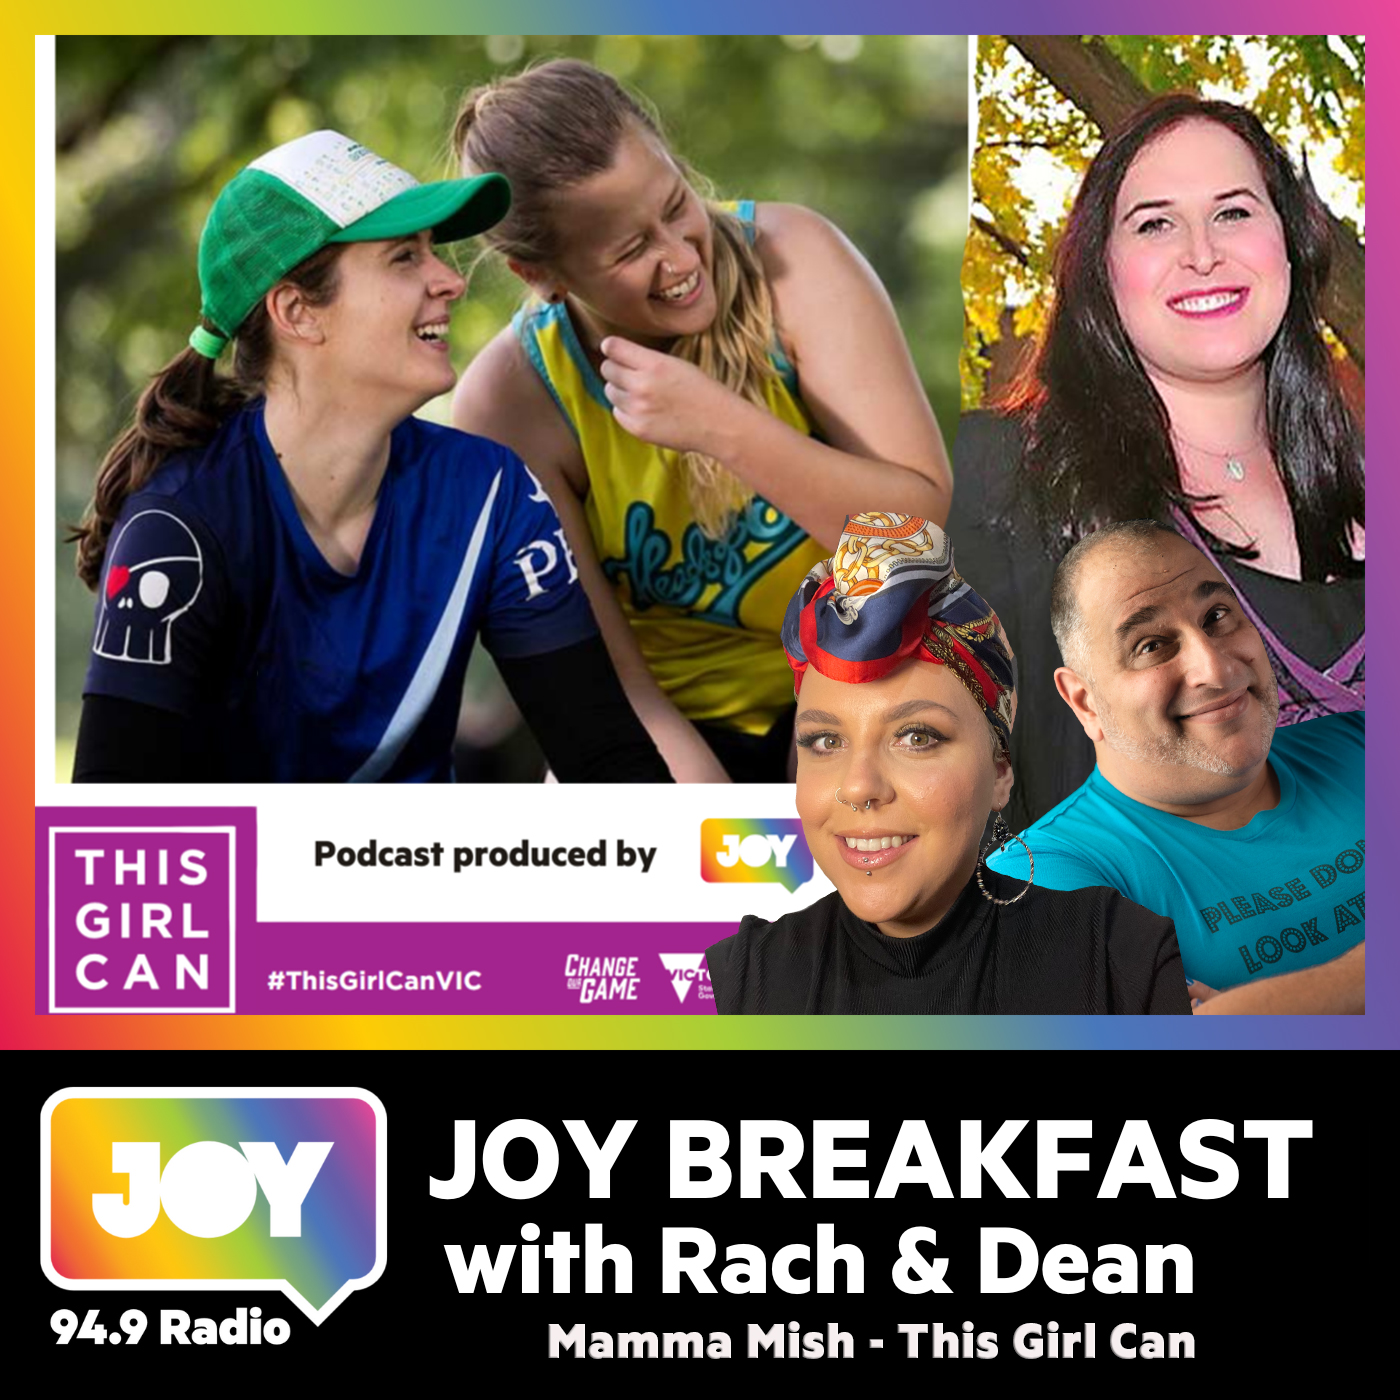 This Girl Can Podcast Hosted by Michelle Shepherd on JOY Breakfast